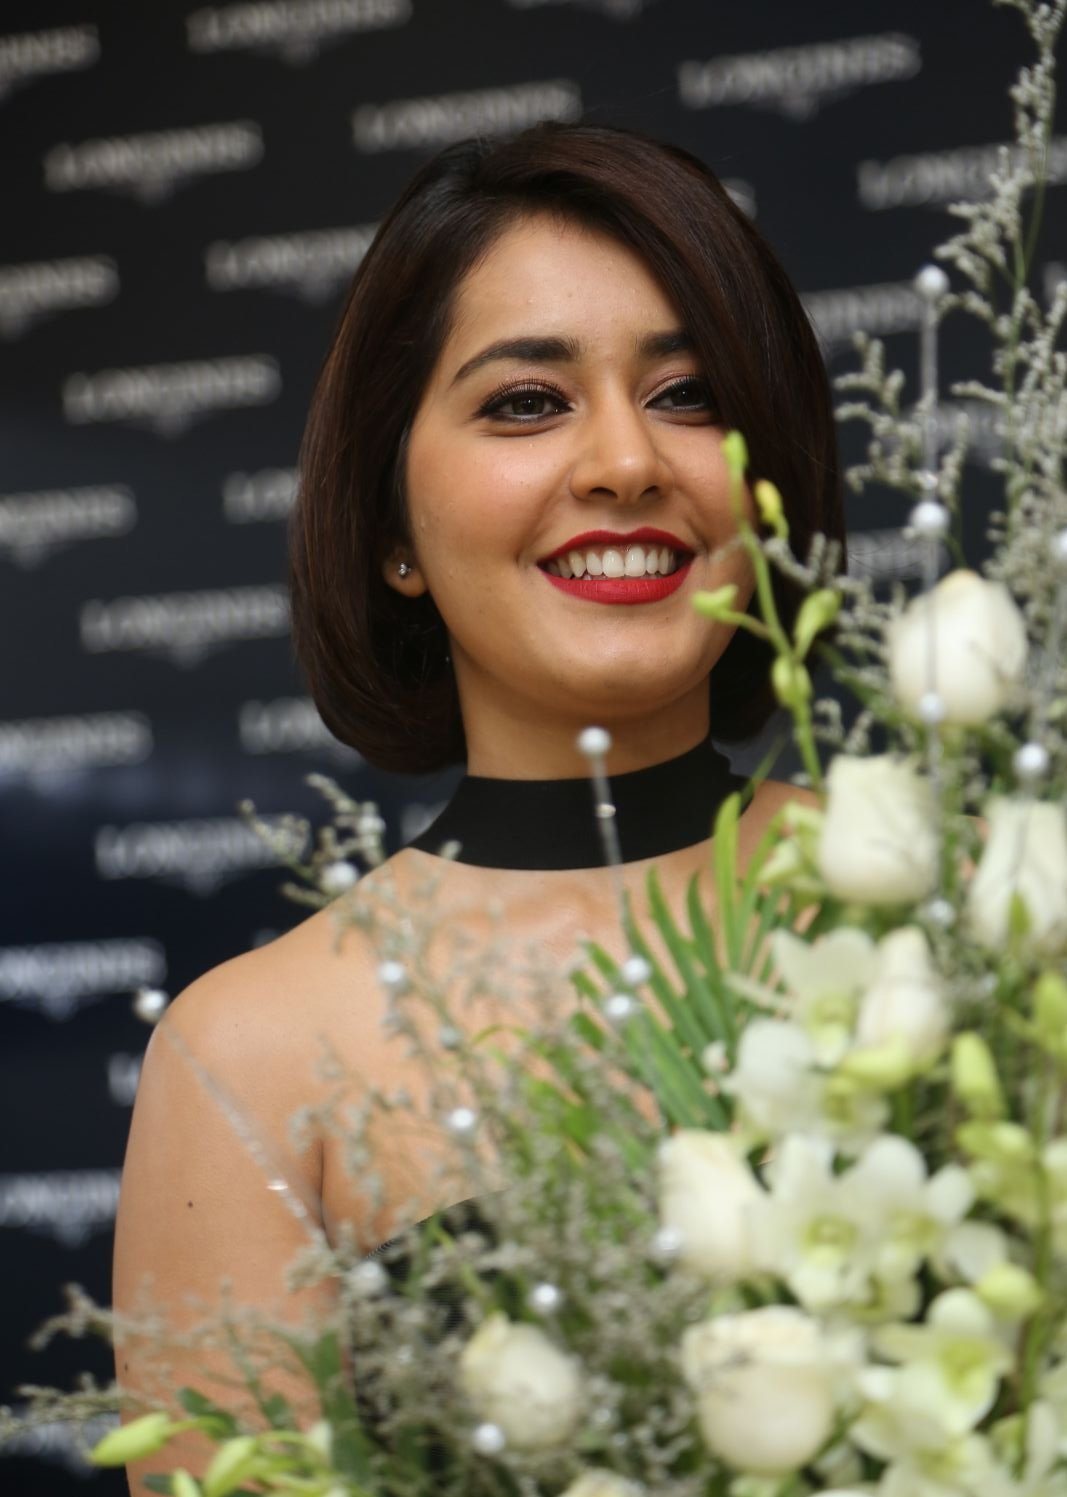 Raashi Khanna Looks Irresistibly Sexy In a Black Figure Hugging At The Launch Of Longines Watchesâ€™s Latest Collection In Jubilee Hills, Hyderabad